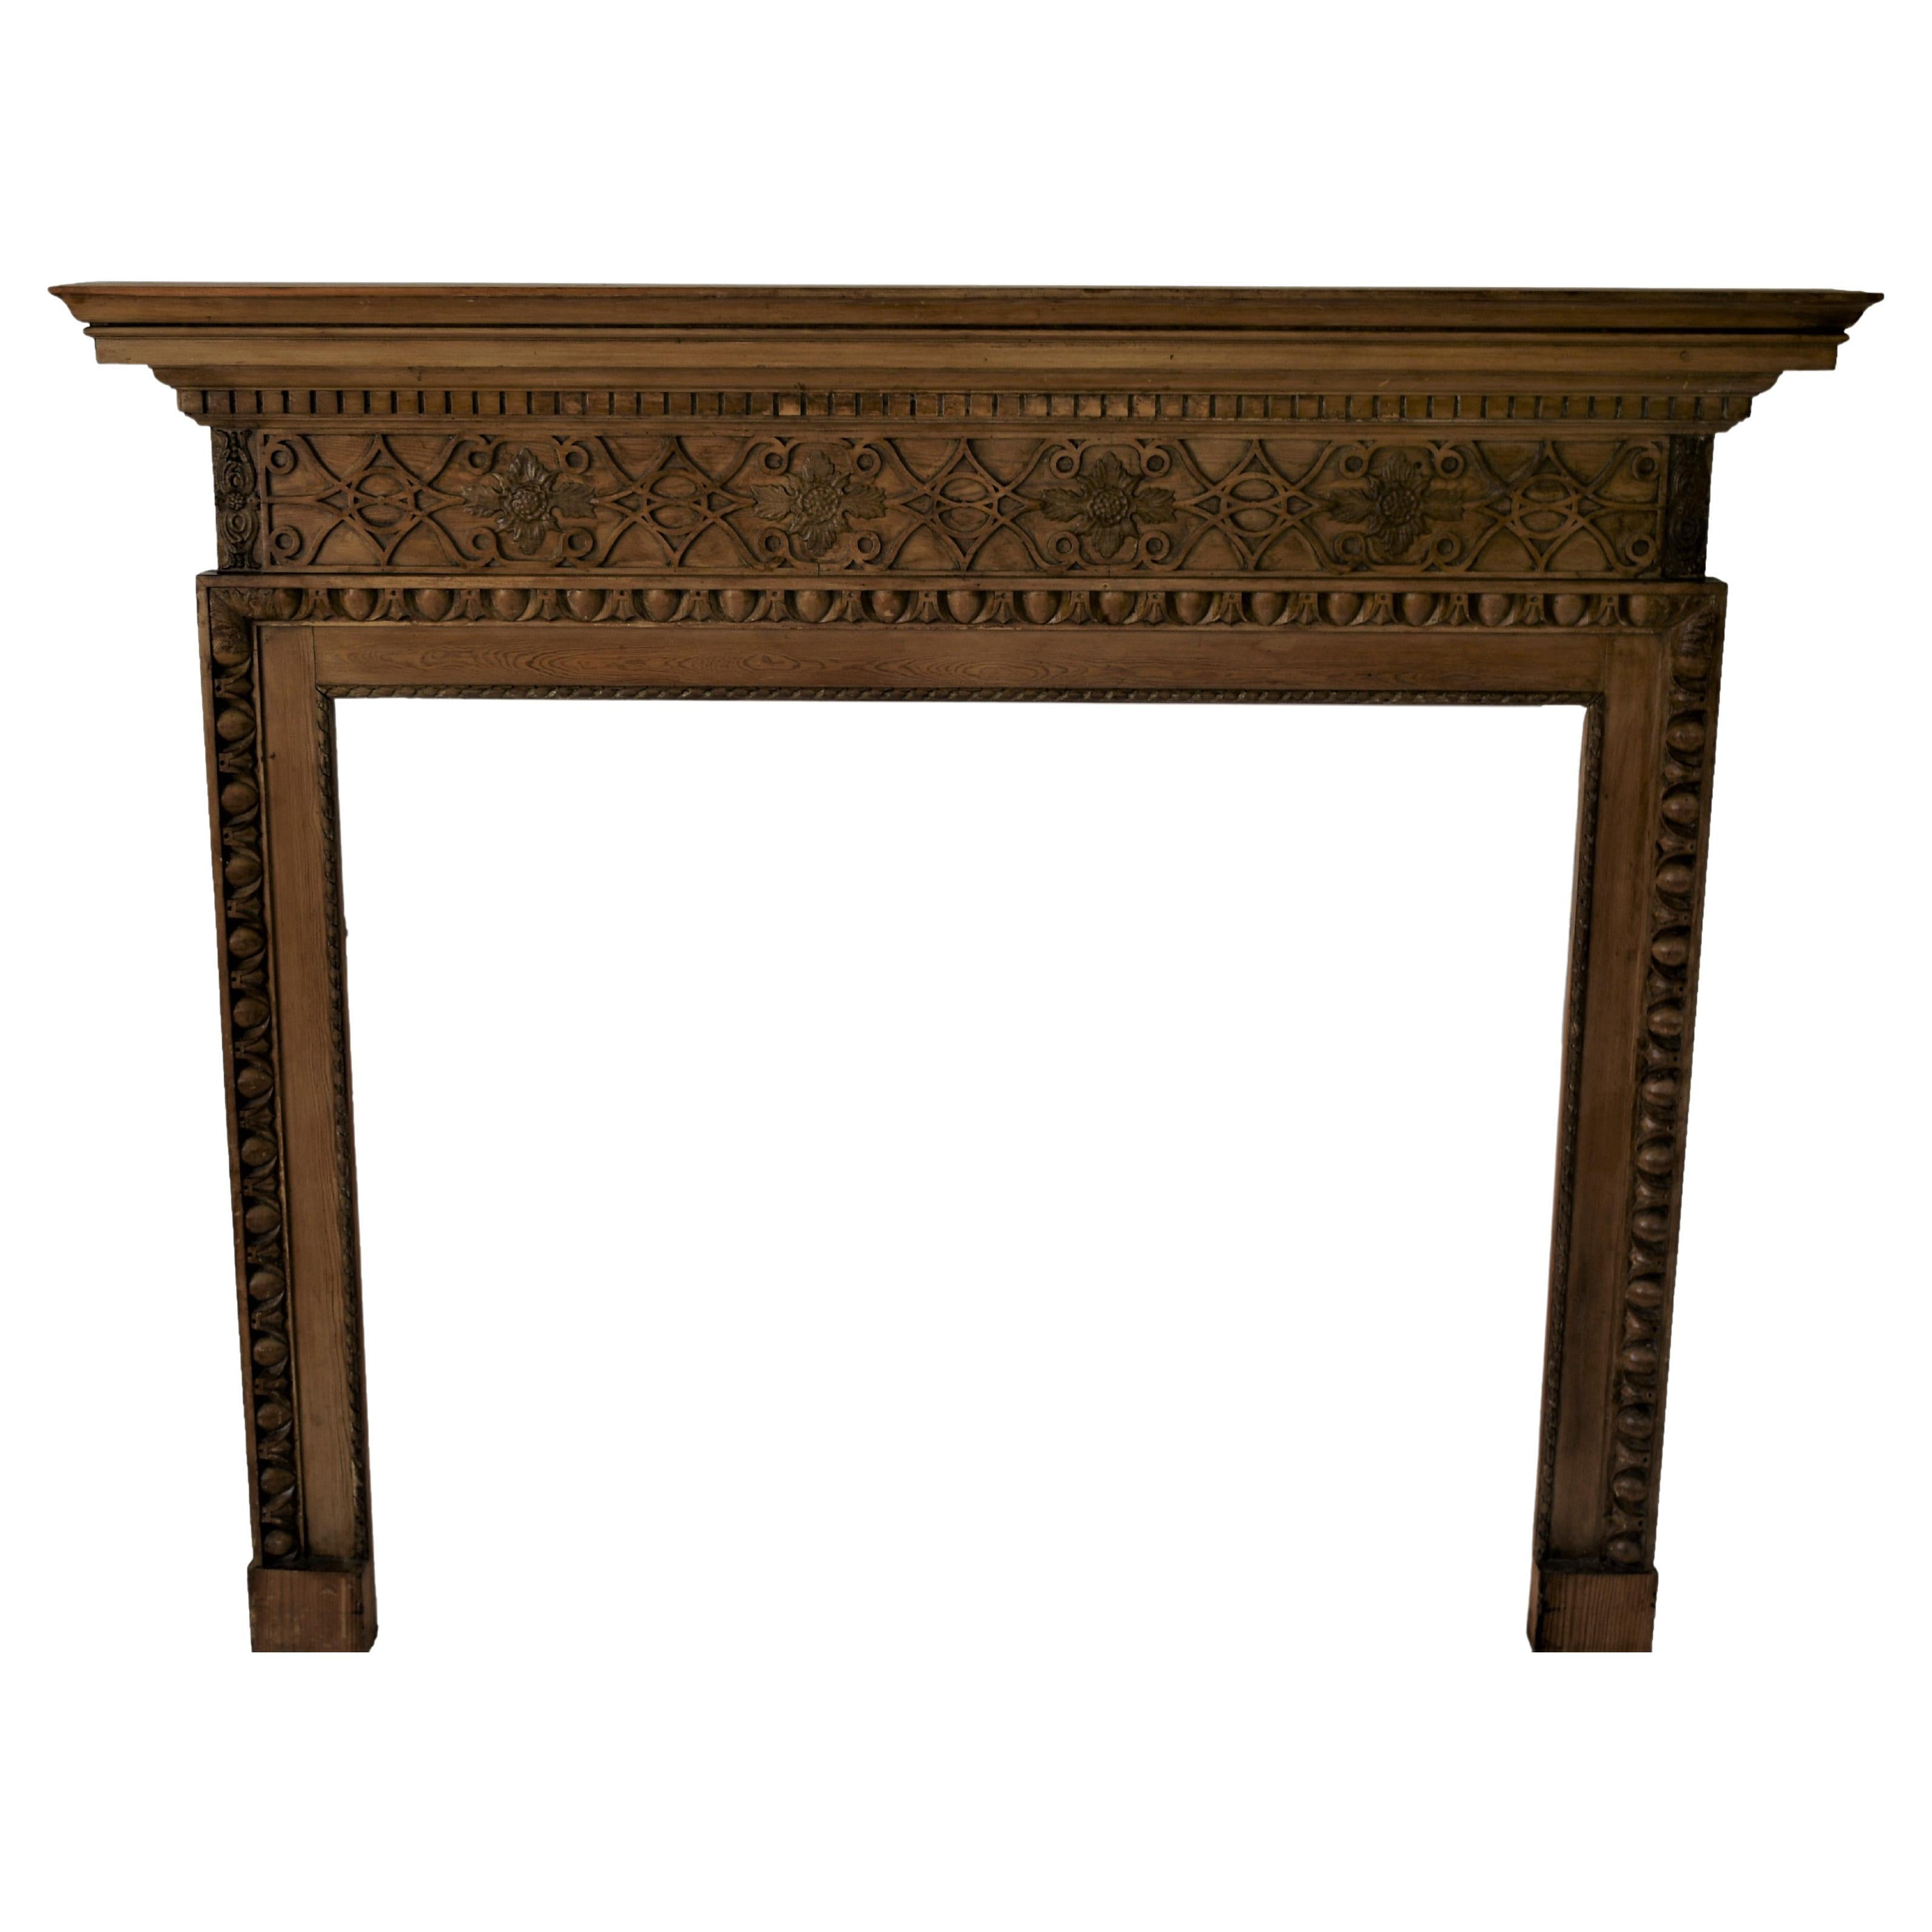 Vintage English Made Hand Carved Pine Fire Surround Mantel